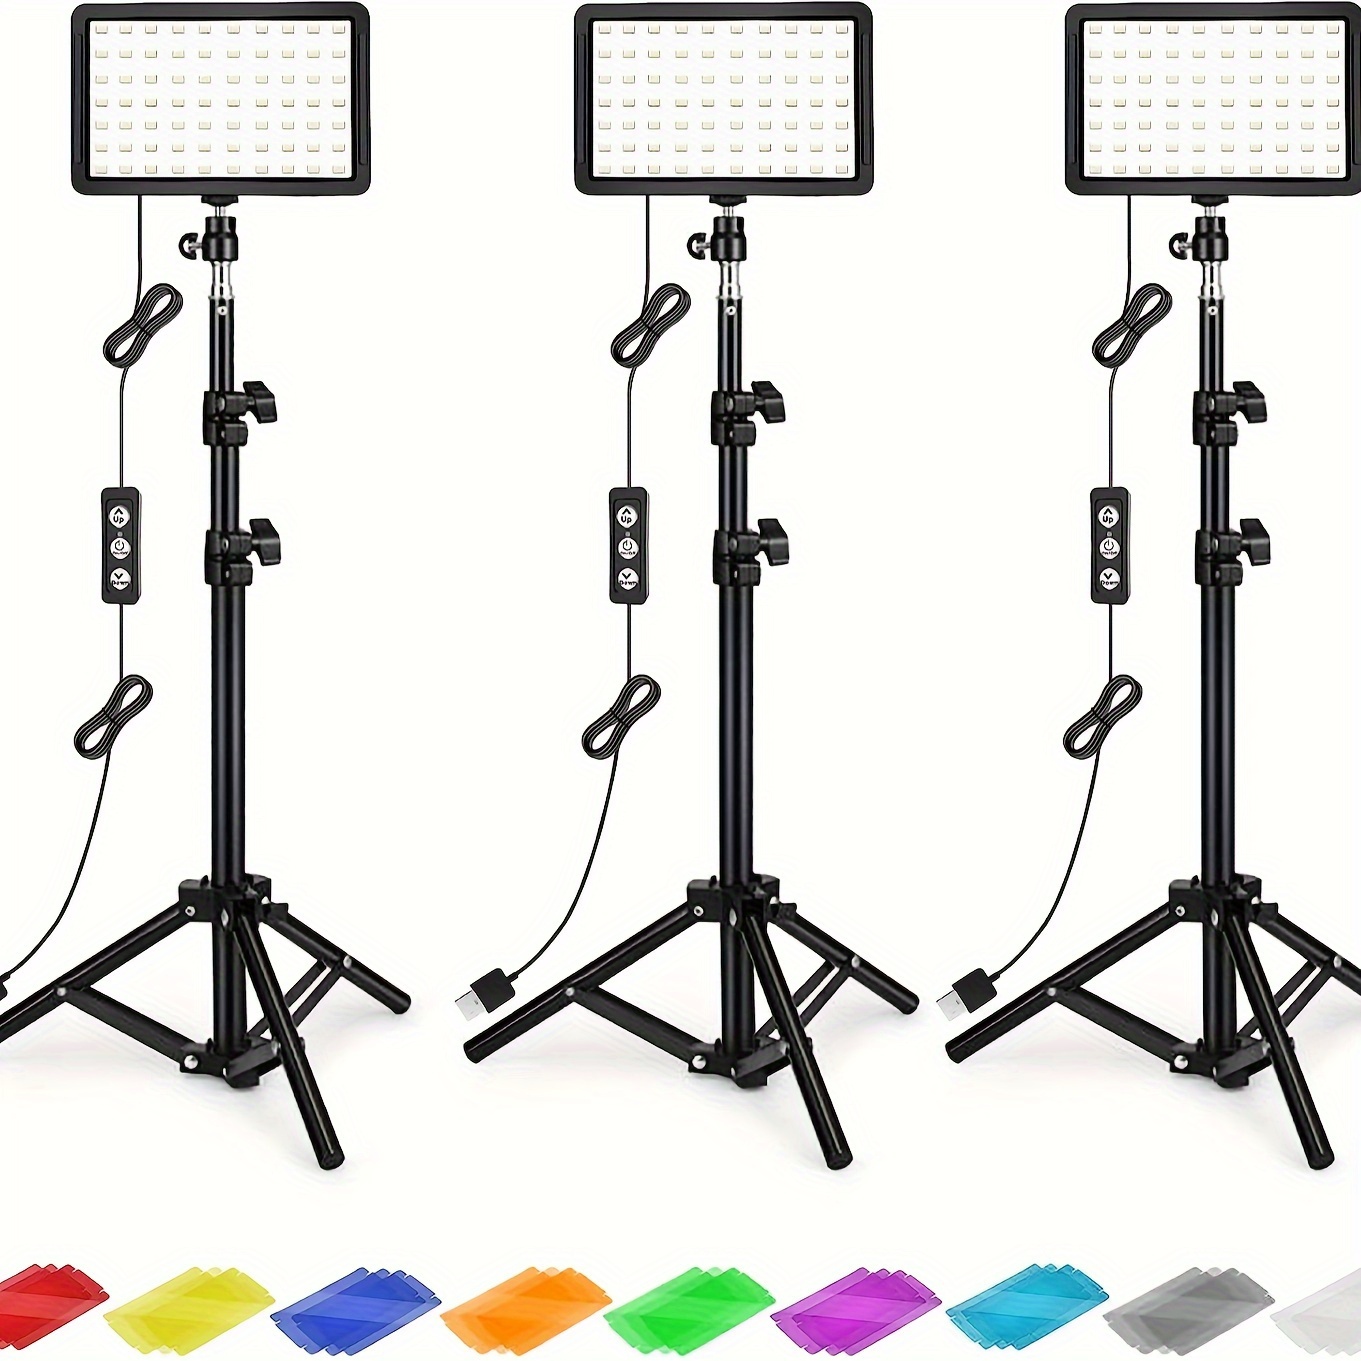 

Photography Lighting Kit Dimmable 5600k Usb Led Video Studio Streaming Lights With Adjustable Tripod Stand And Color Filters For Table Top/photo Video Shooting (3 Pcs)